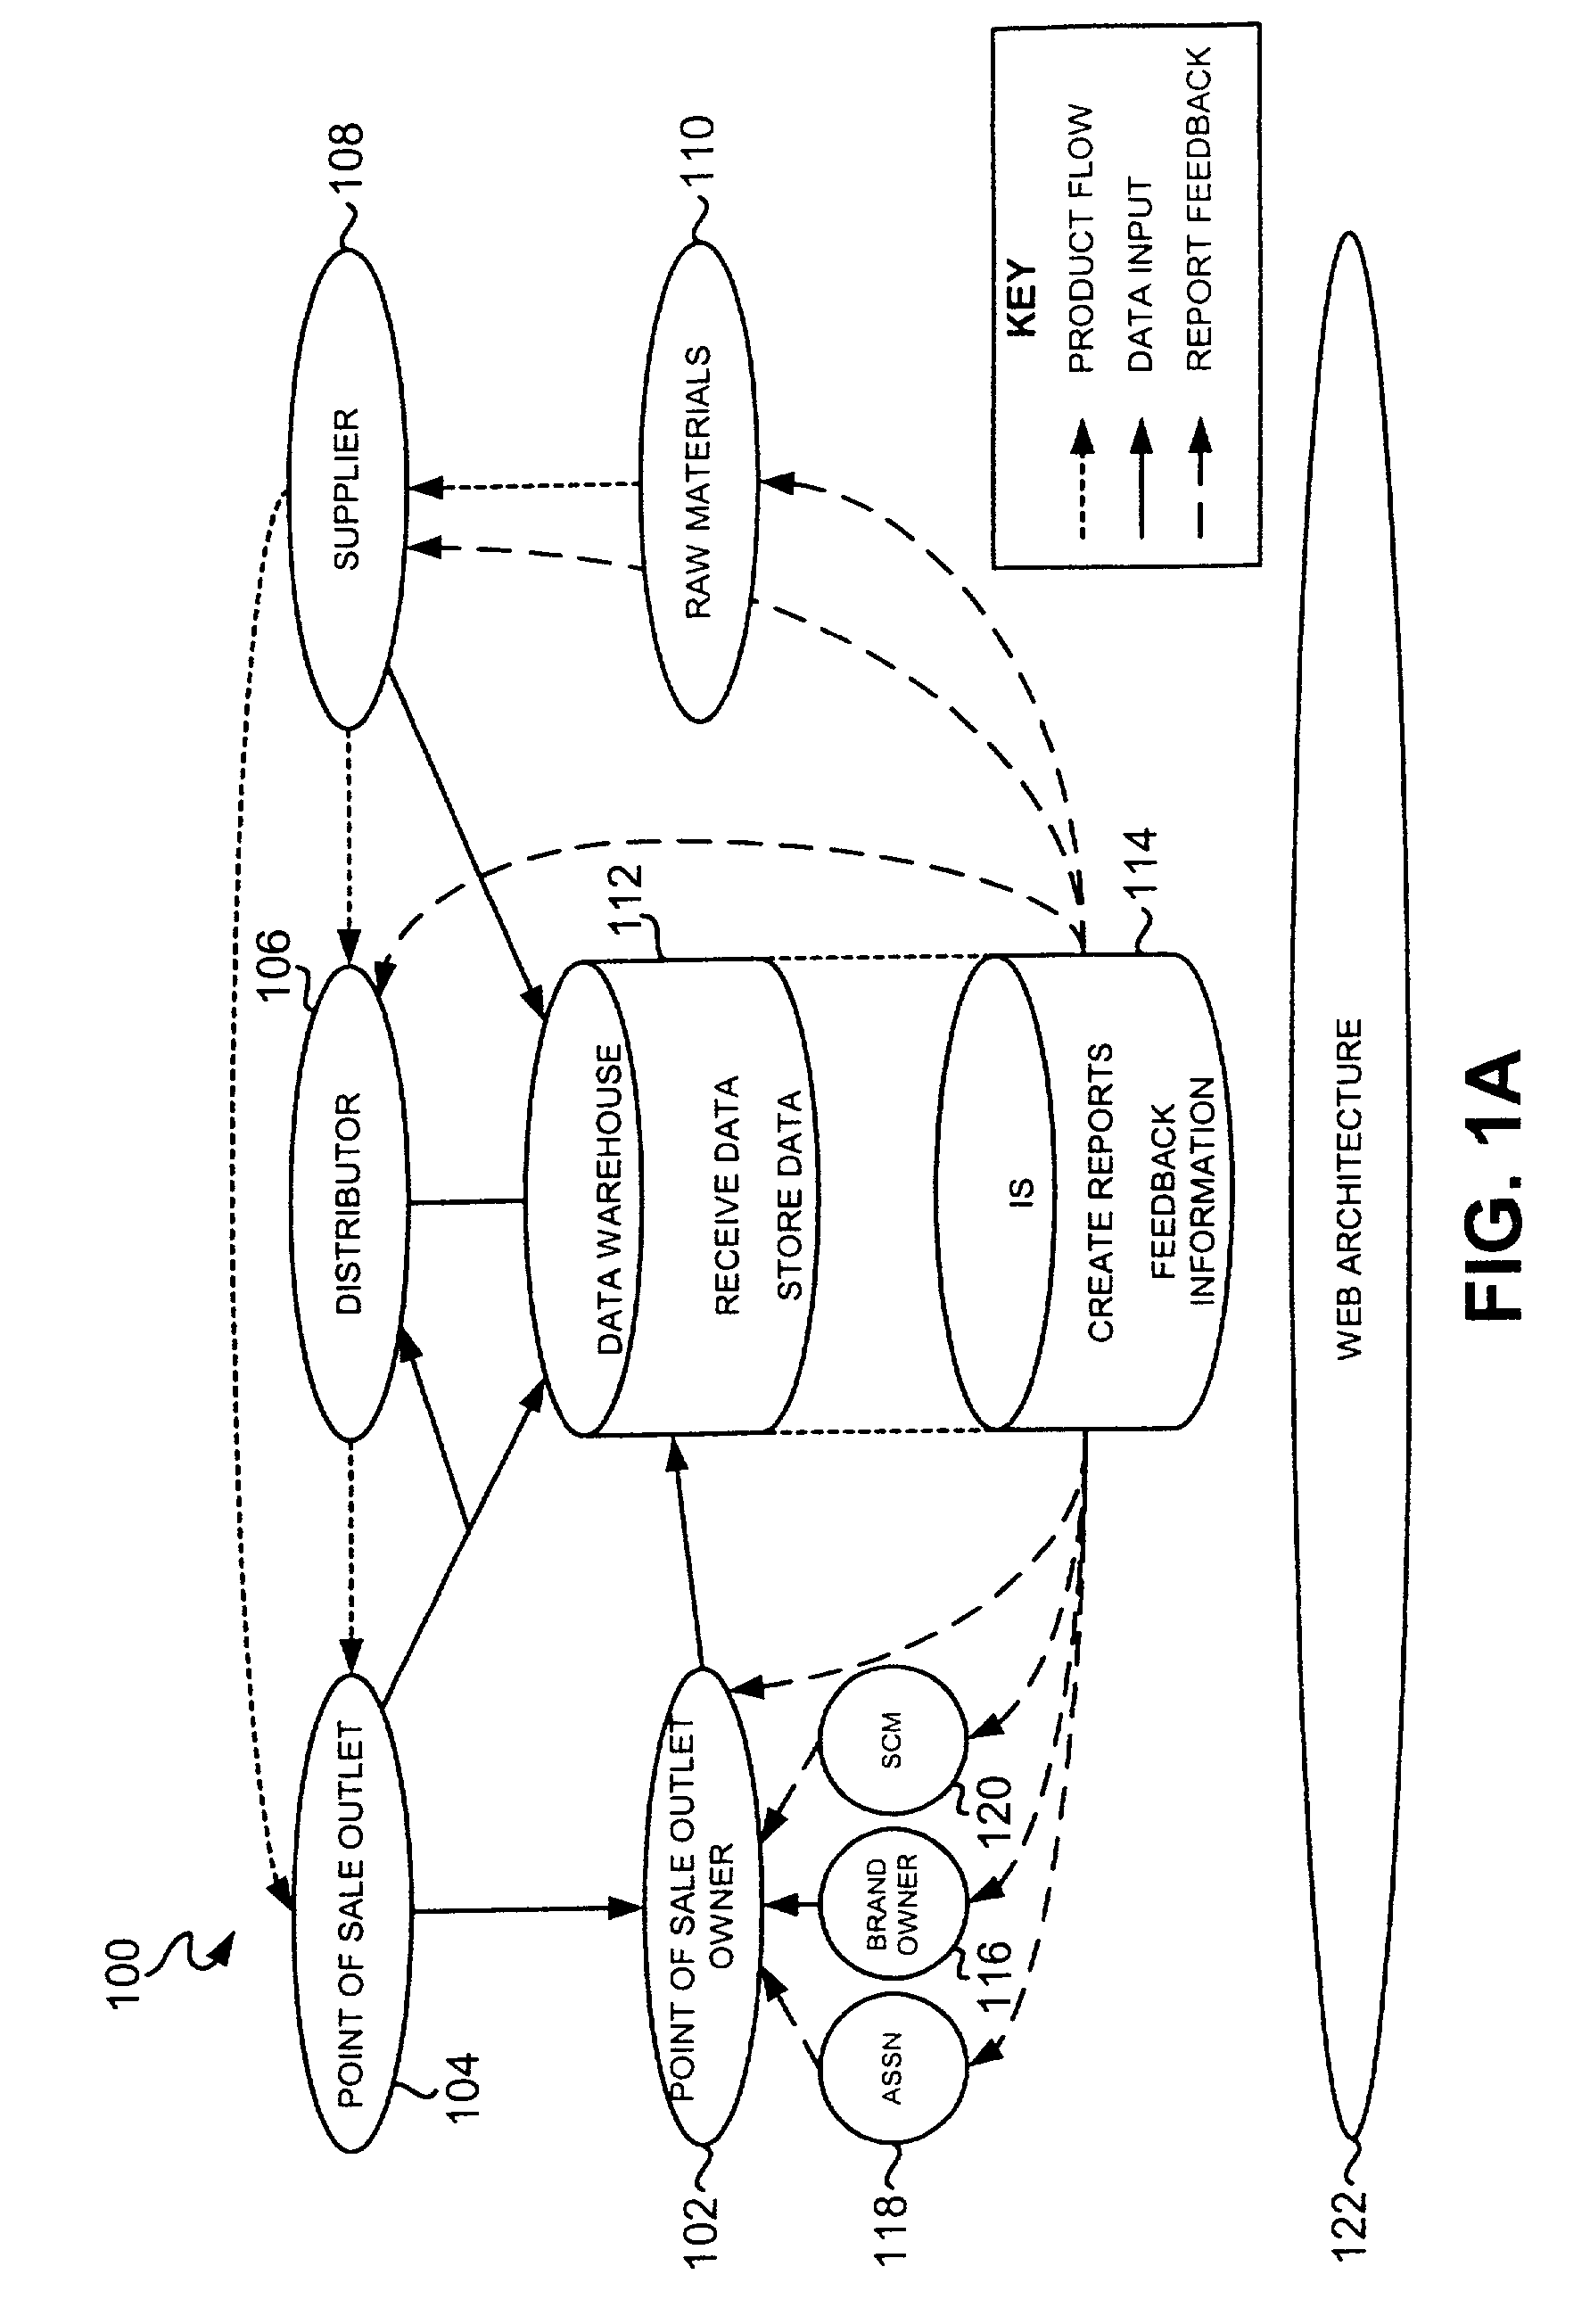 System, method and computer program product for normalizing data in a supply chain management framework